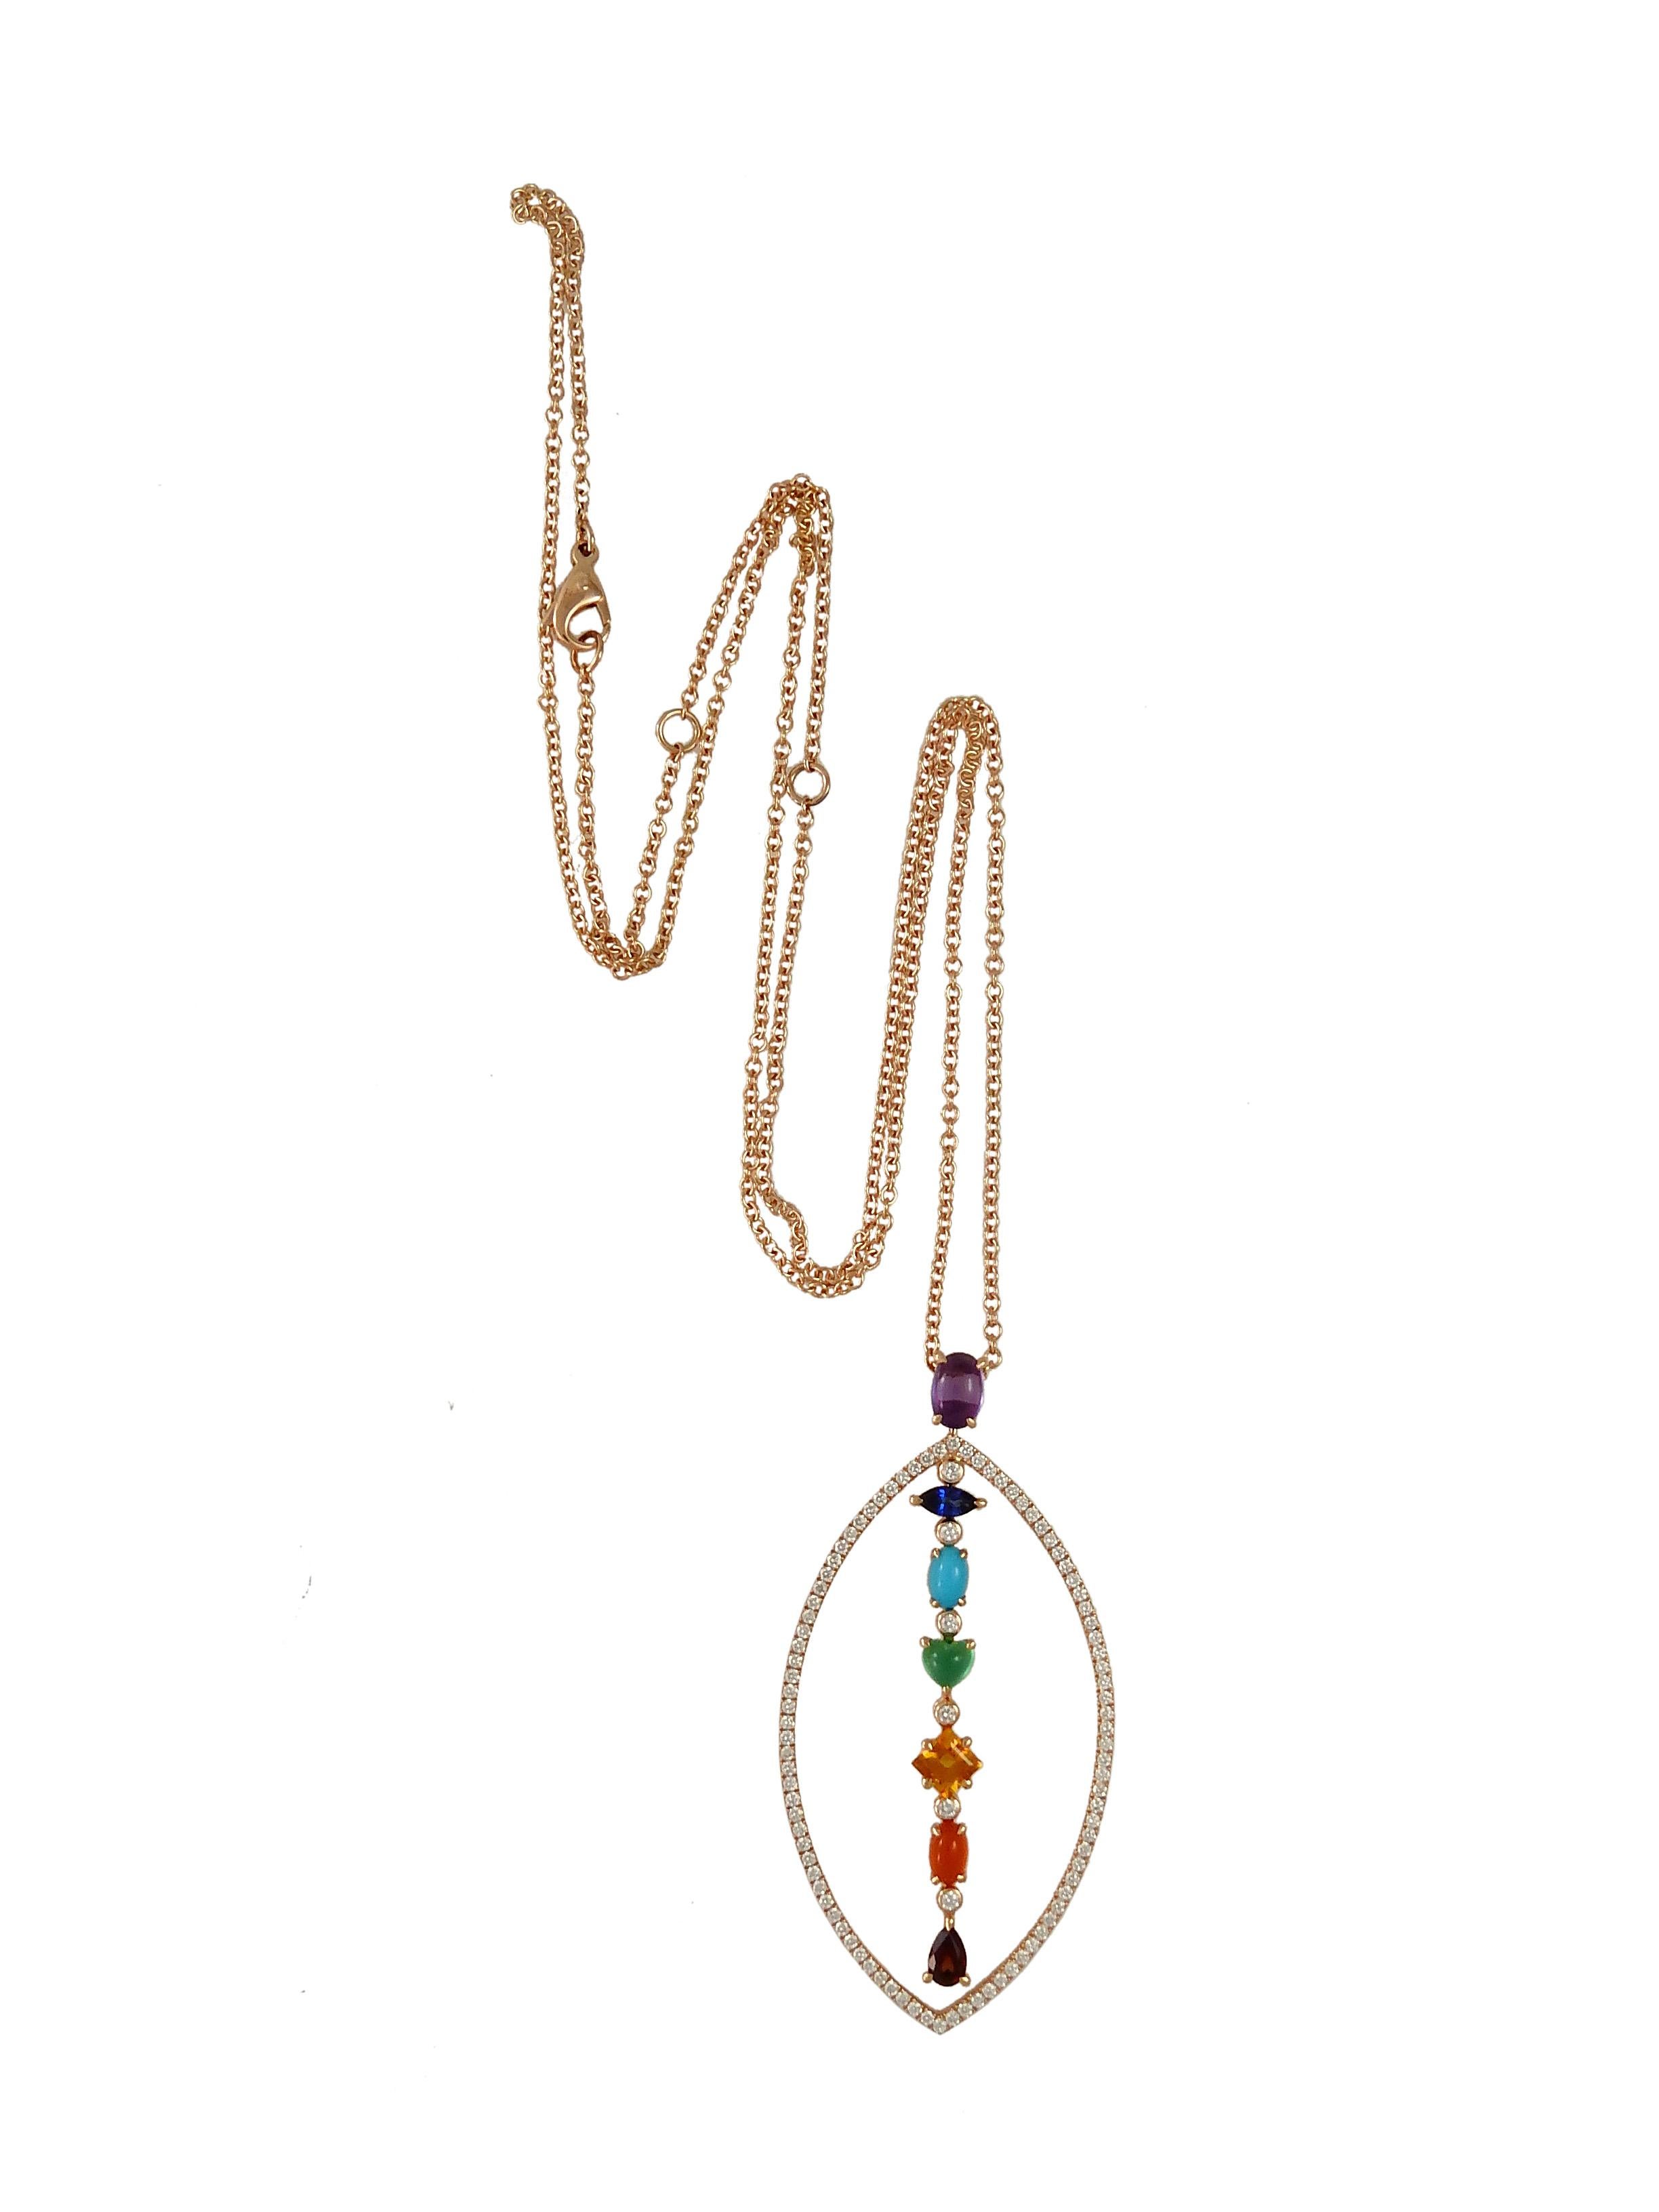 AURA : A white gold, diamonds and colored stones Chakra pendant by Frederique Berman.
This design symbolizes the perfect alignment of the seven main chakras, when open and blooming, so the circulating energy  creates a shining halo around the